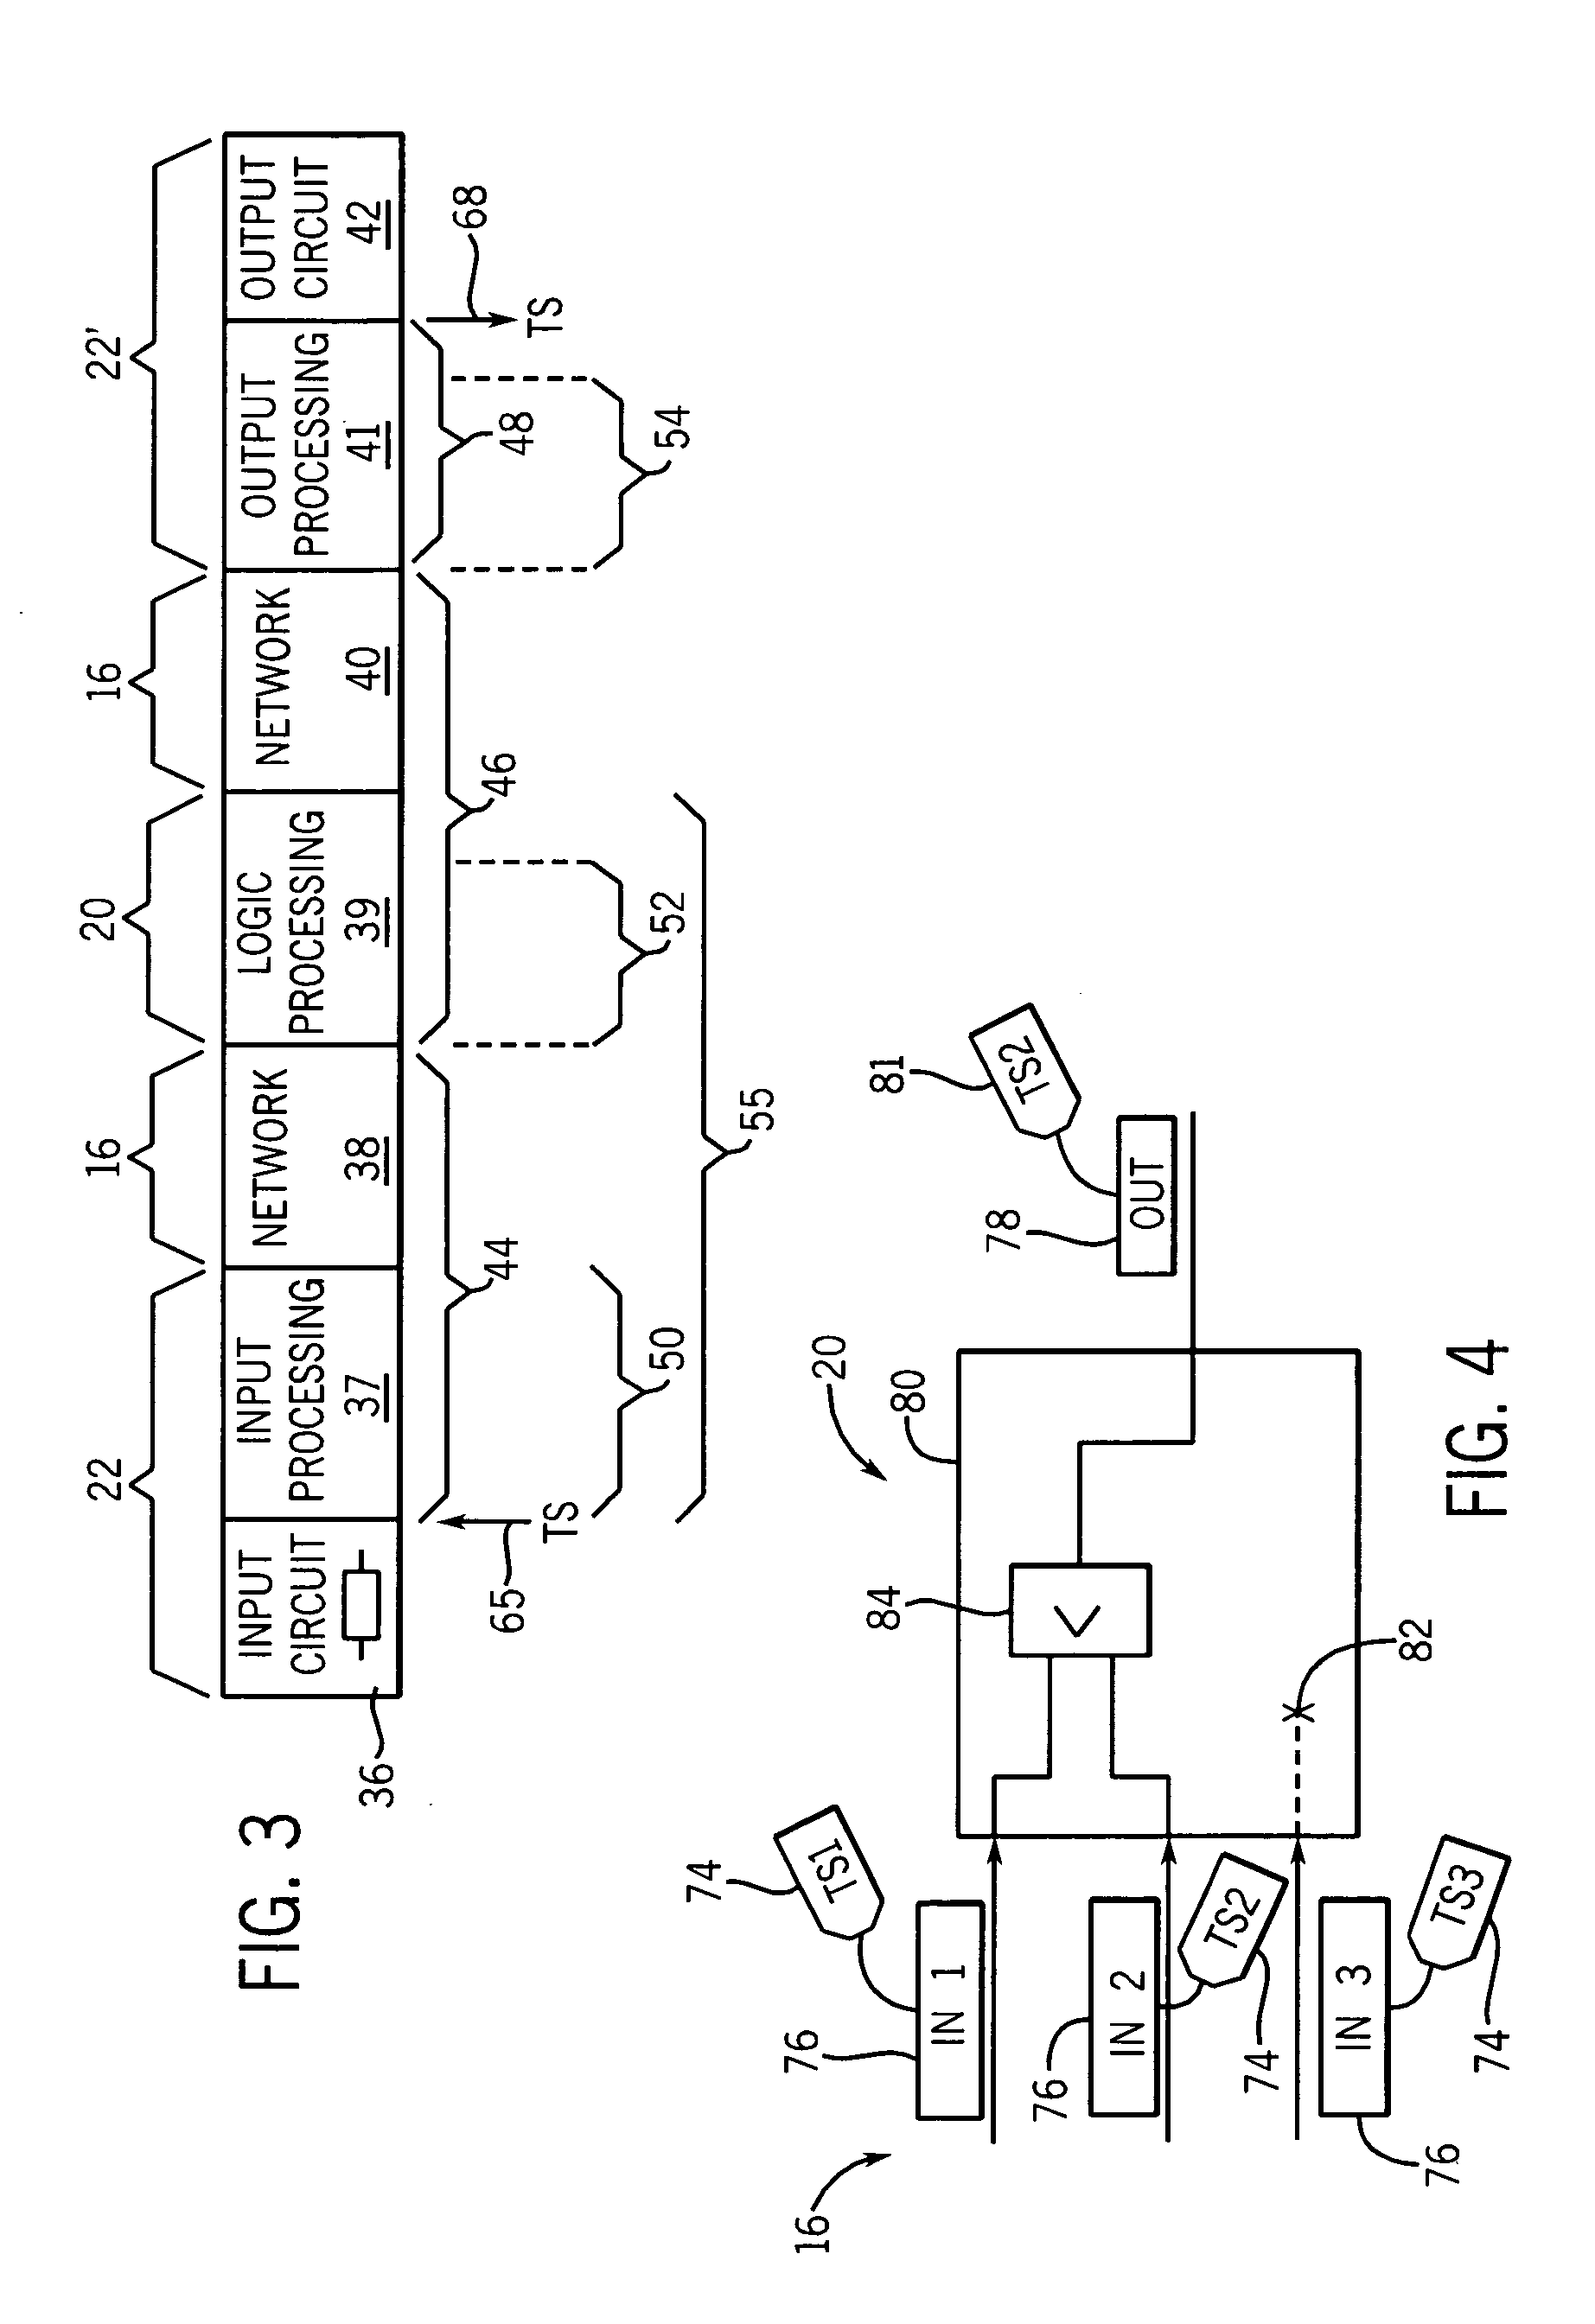 Safety controller with safety response time monitoring